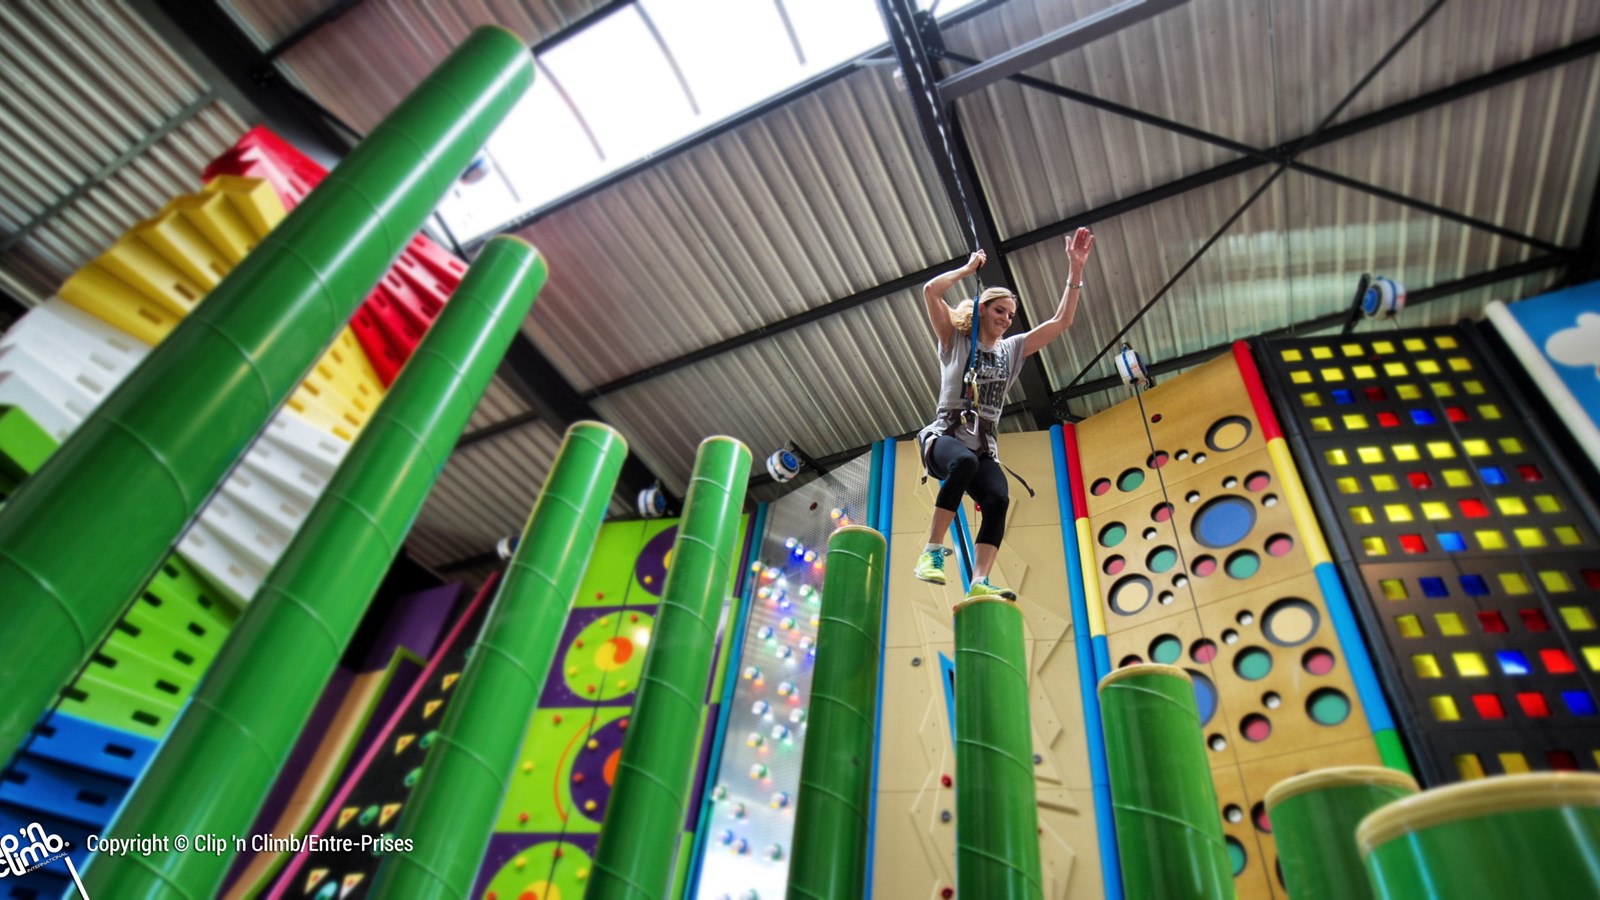 A person with a harness on leaping from one high green soft pillar to another at height. Multicoloured climbing wall features are in the background.